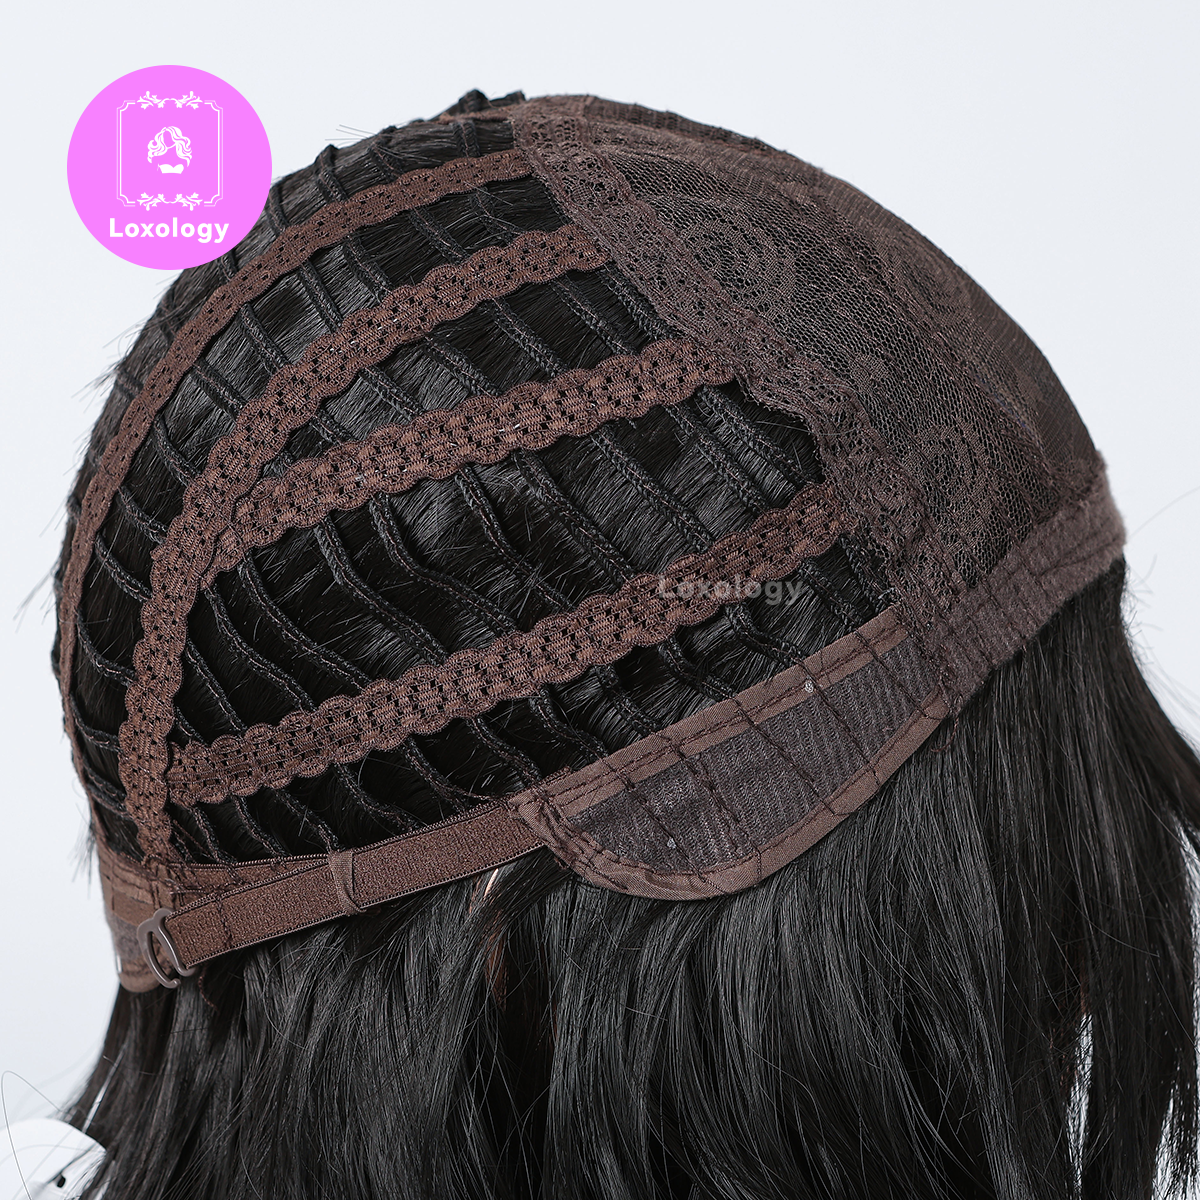 【Elsie】Loxology | 24 Inch long curly wigs black with bangs wigs